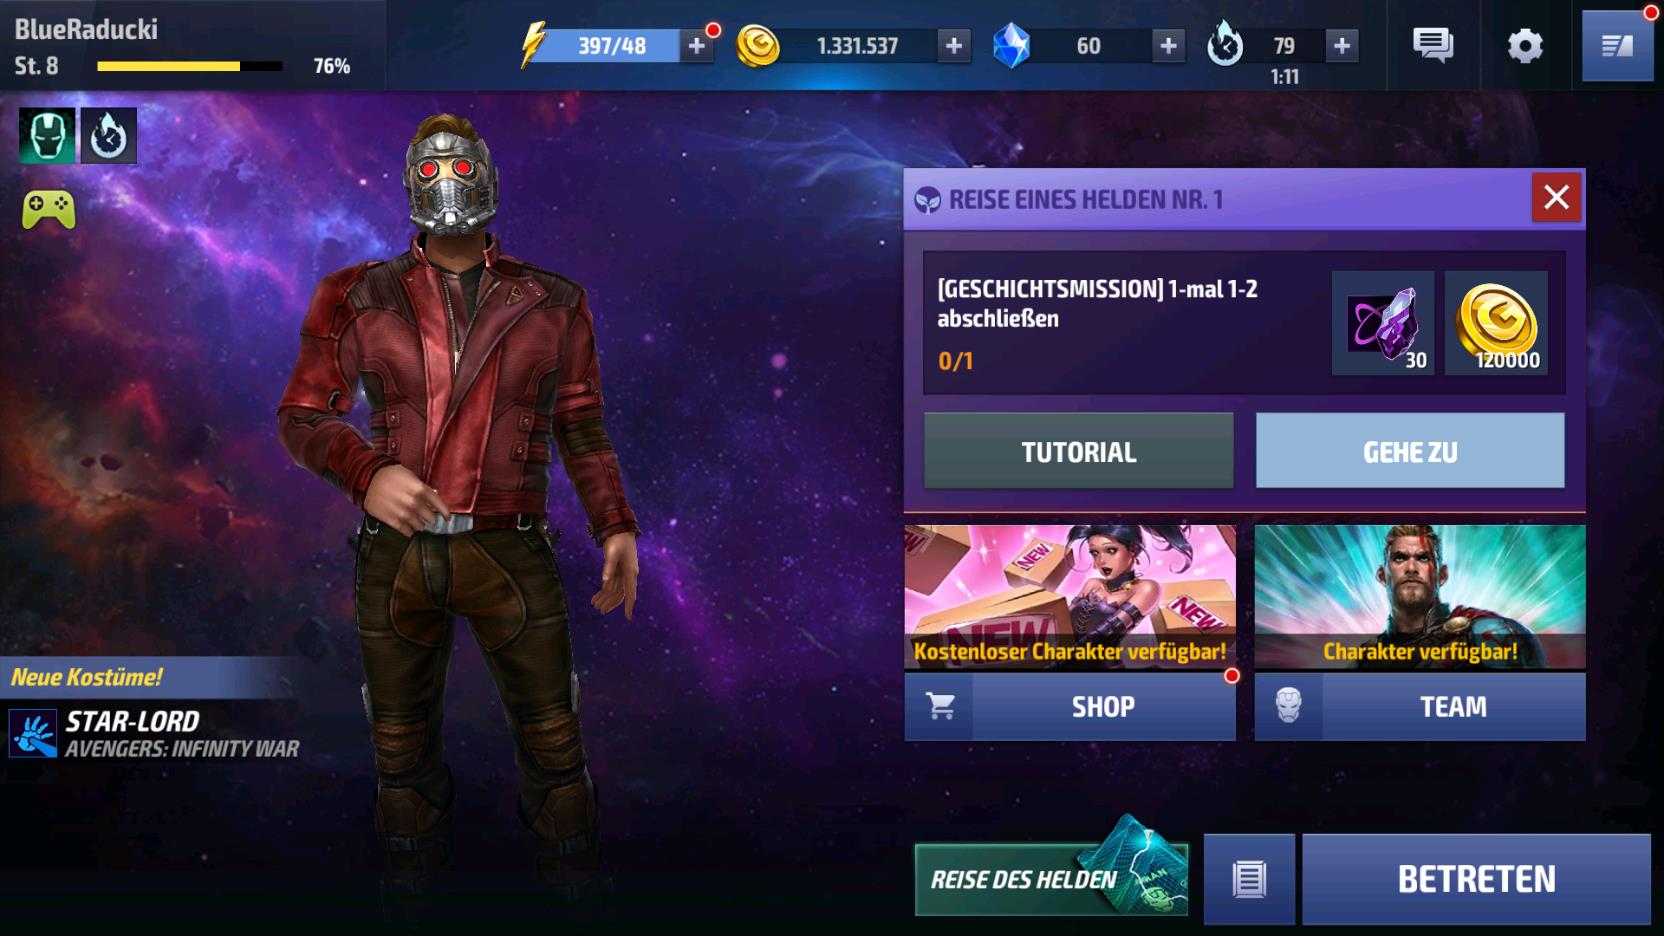 MARVEL Future Fight: Energie Guide